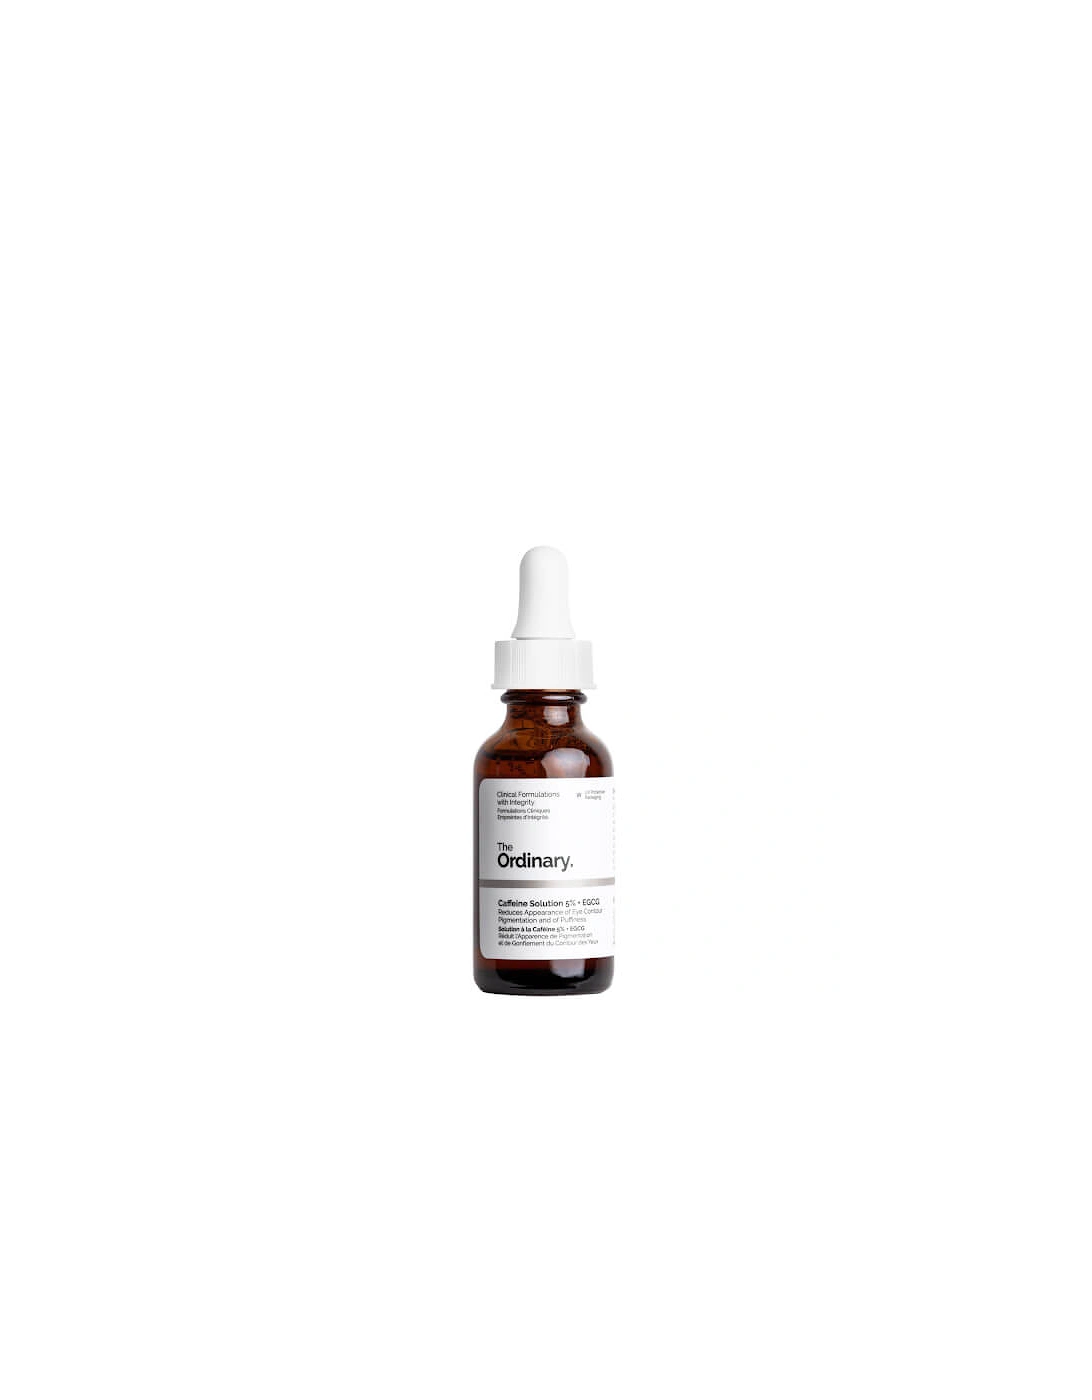 Caffeine Solution 5% + EGCG 30ml - - Caffeine Solution 5% + EGCG 30ml - T - Caffeine Solution 5% + EGCG 30ml - Ian - Caffeine Solution 5% + EGCG 30ml - Debbie - Caffeine Solution 5% + EGCG 30ml - Jay, 2 of 1